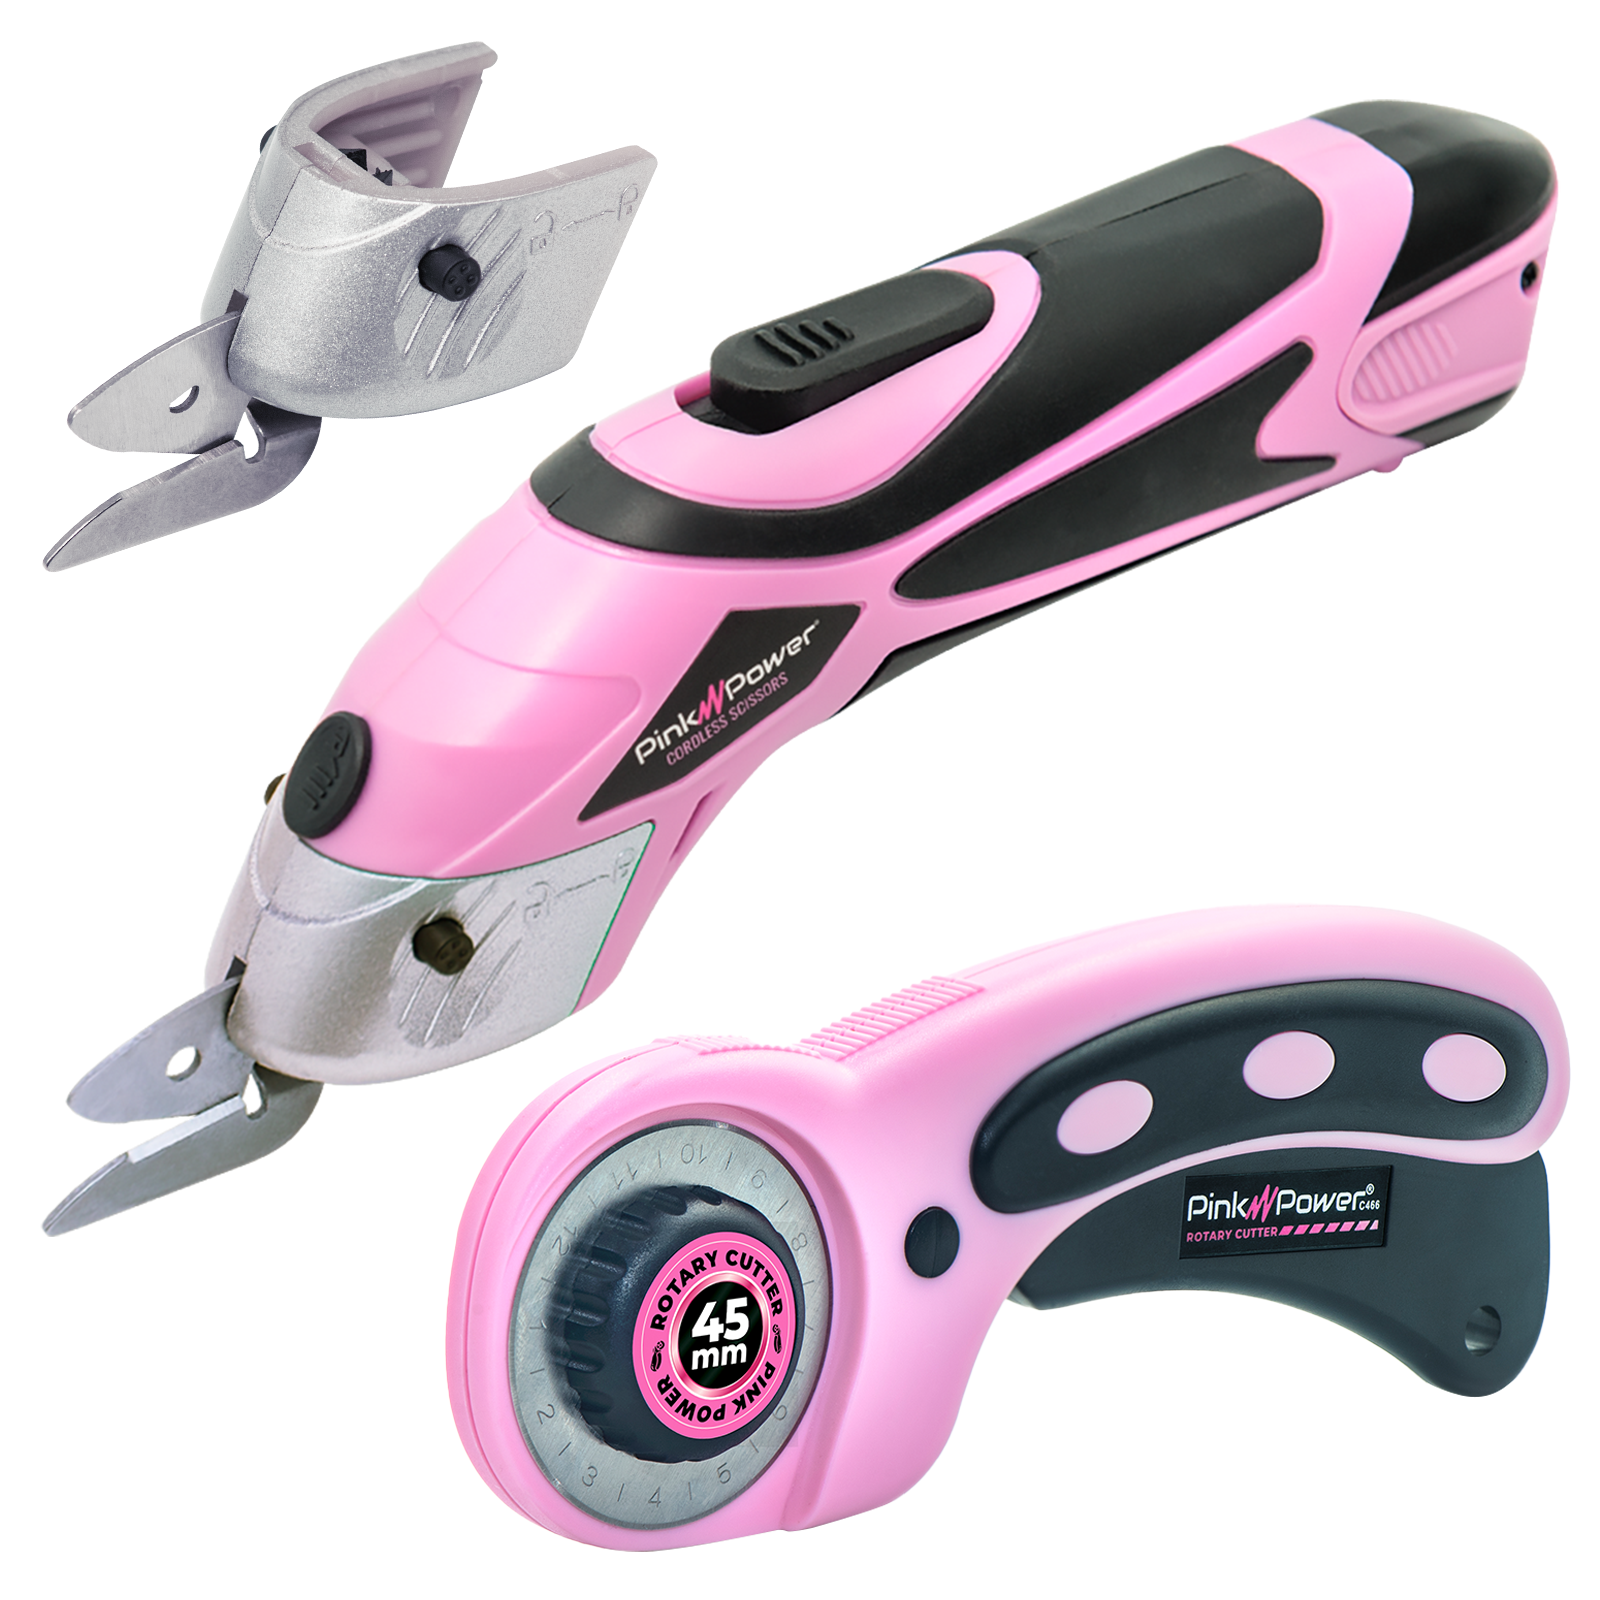 Pink Power Electric Fabric Scissors Box Cutter for Crafts, Sewing, Cardboard, Carpet & Scrapbooking - Heavy Duty Cutting Tool, Automatic Cordless